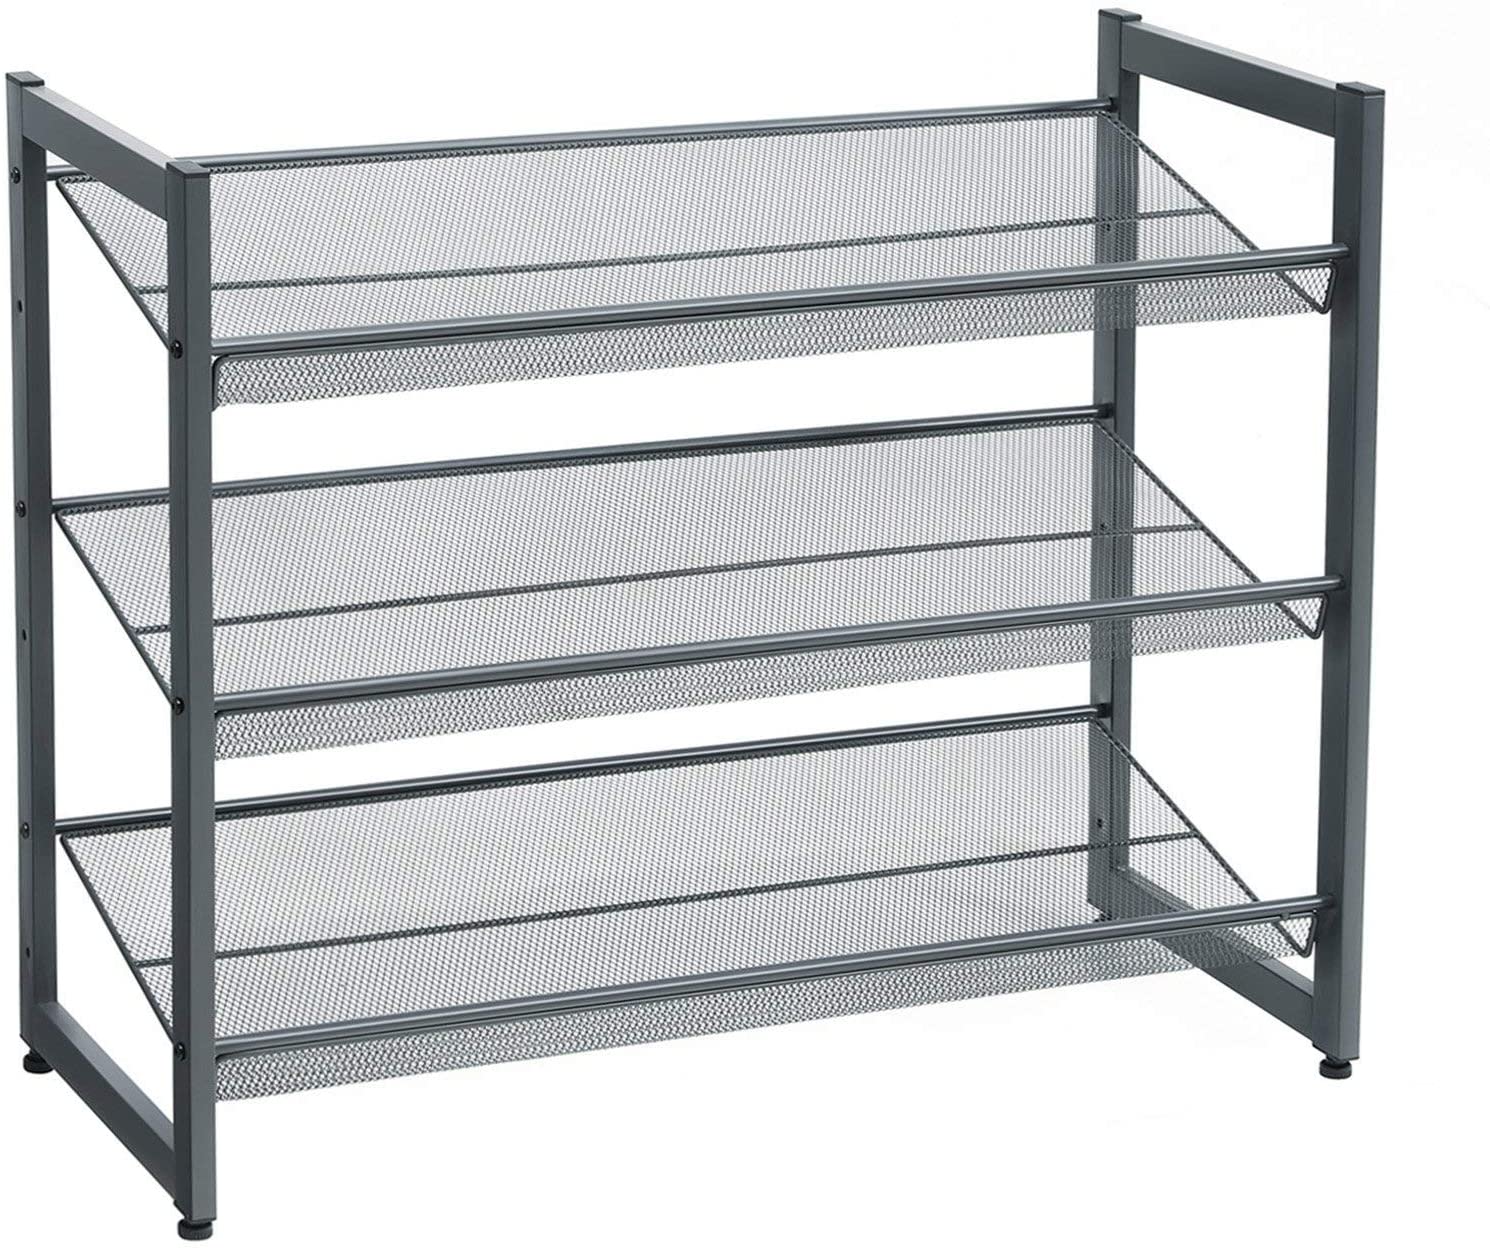 3 Tier metal Mesh Shoe Rack, Adjustable to Flat or Angled Shelves, Stackable Storage Organiser in the Entryway, Grey, LMR03GB RAW58.dk 